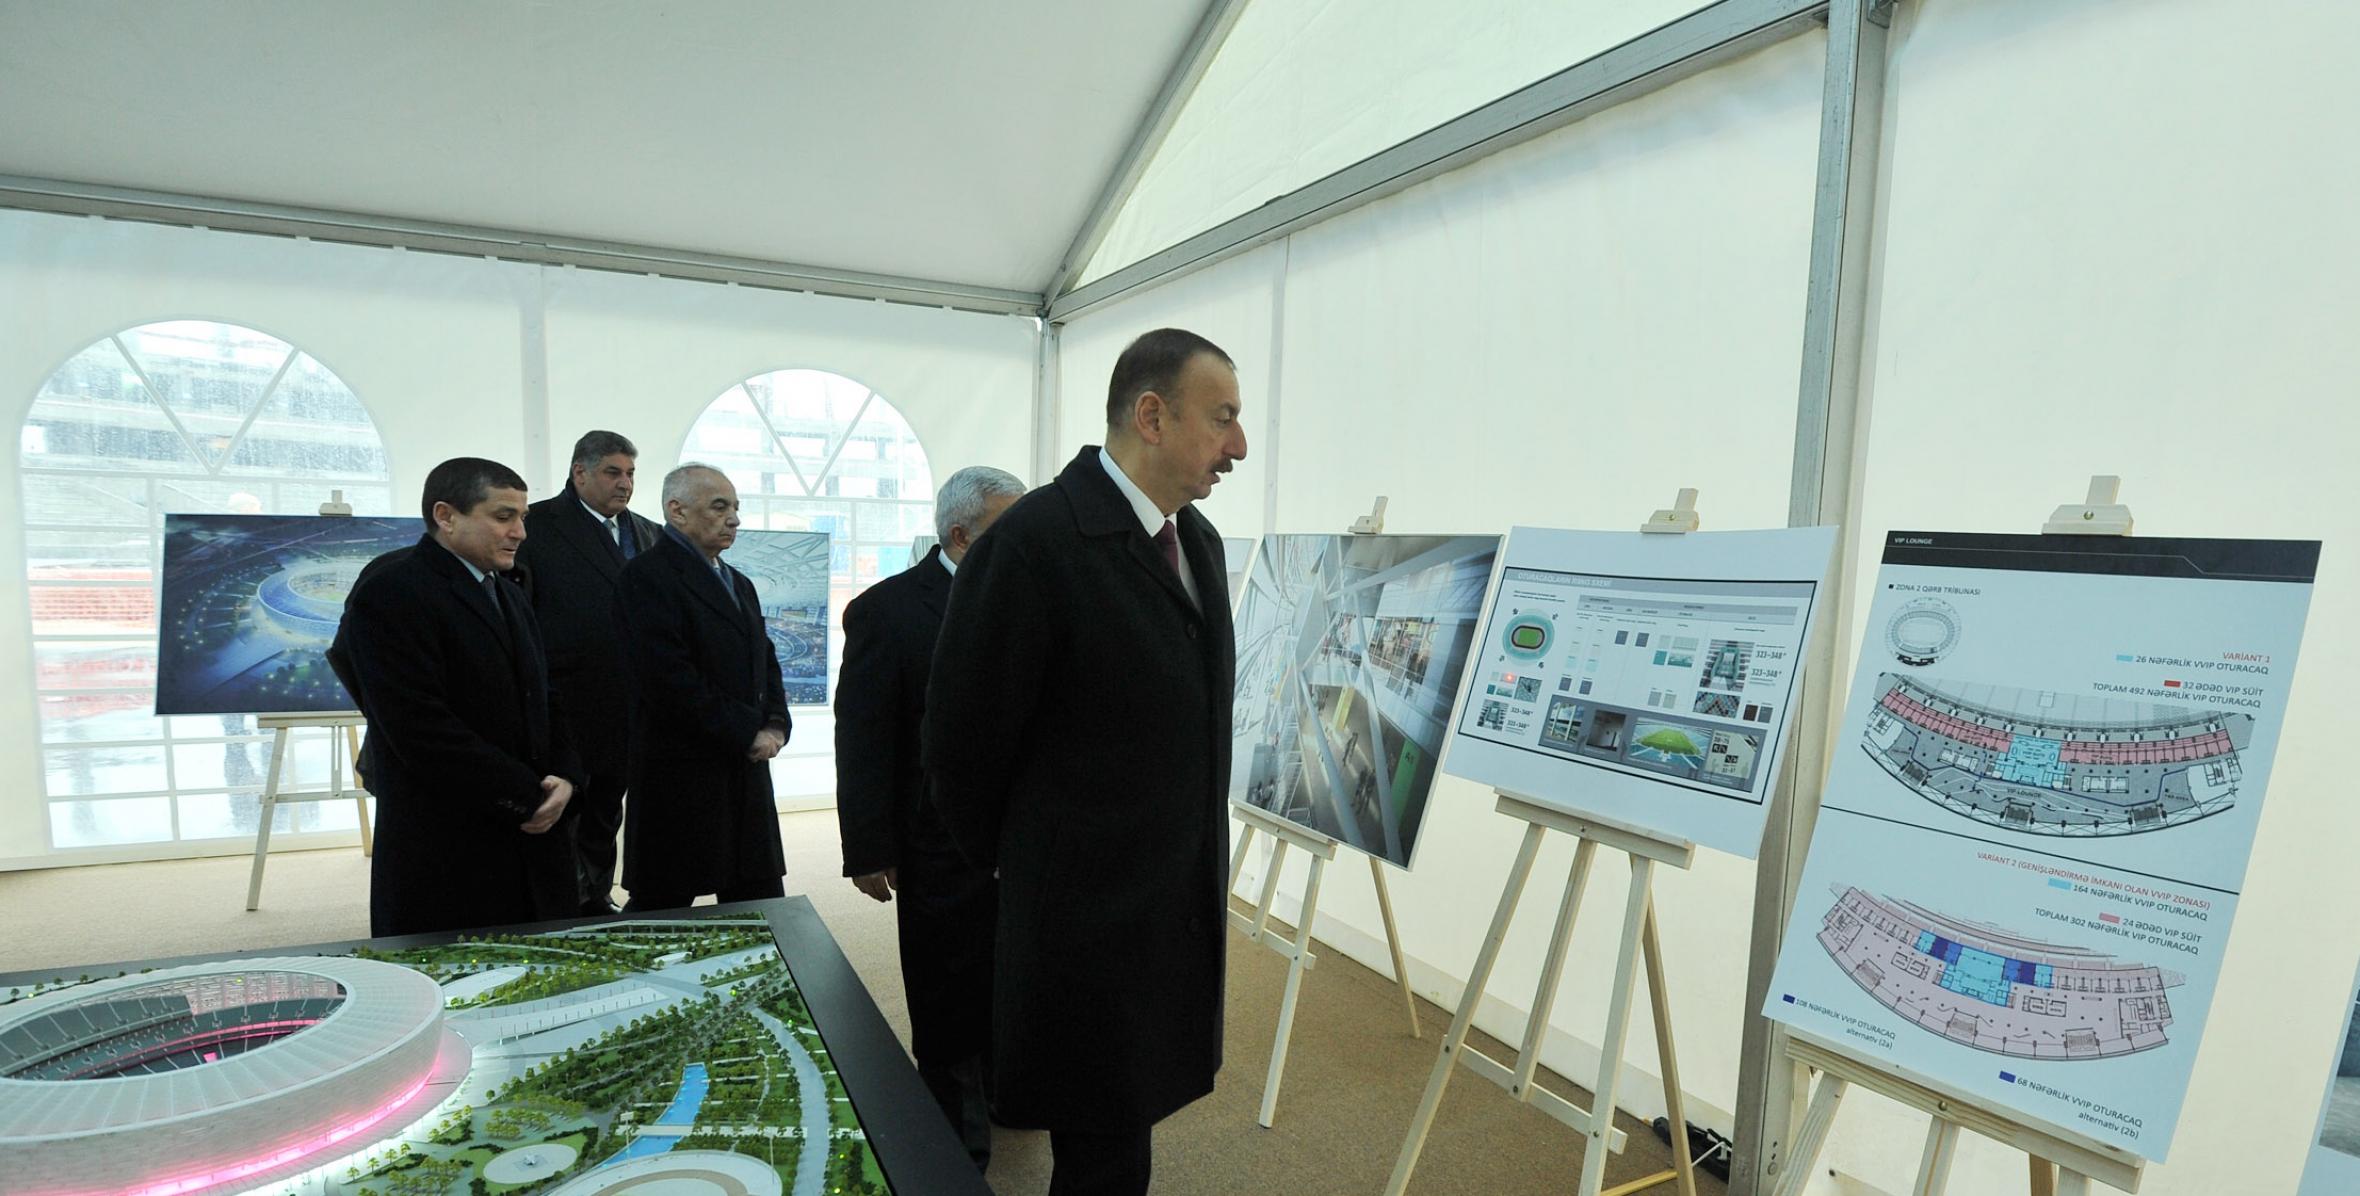 Ilham Aliyev reviewed the progress in the construction work on the Baku Olympic Stadium